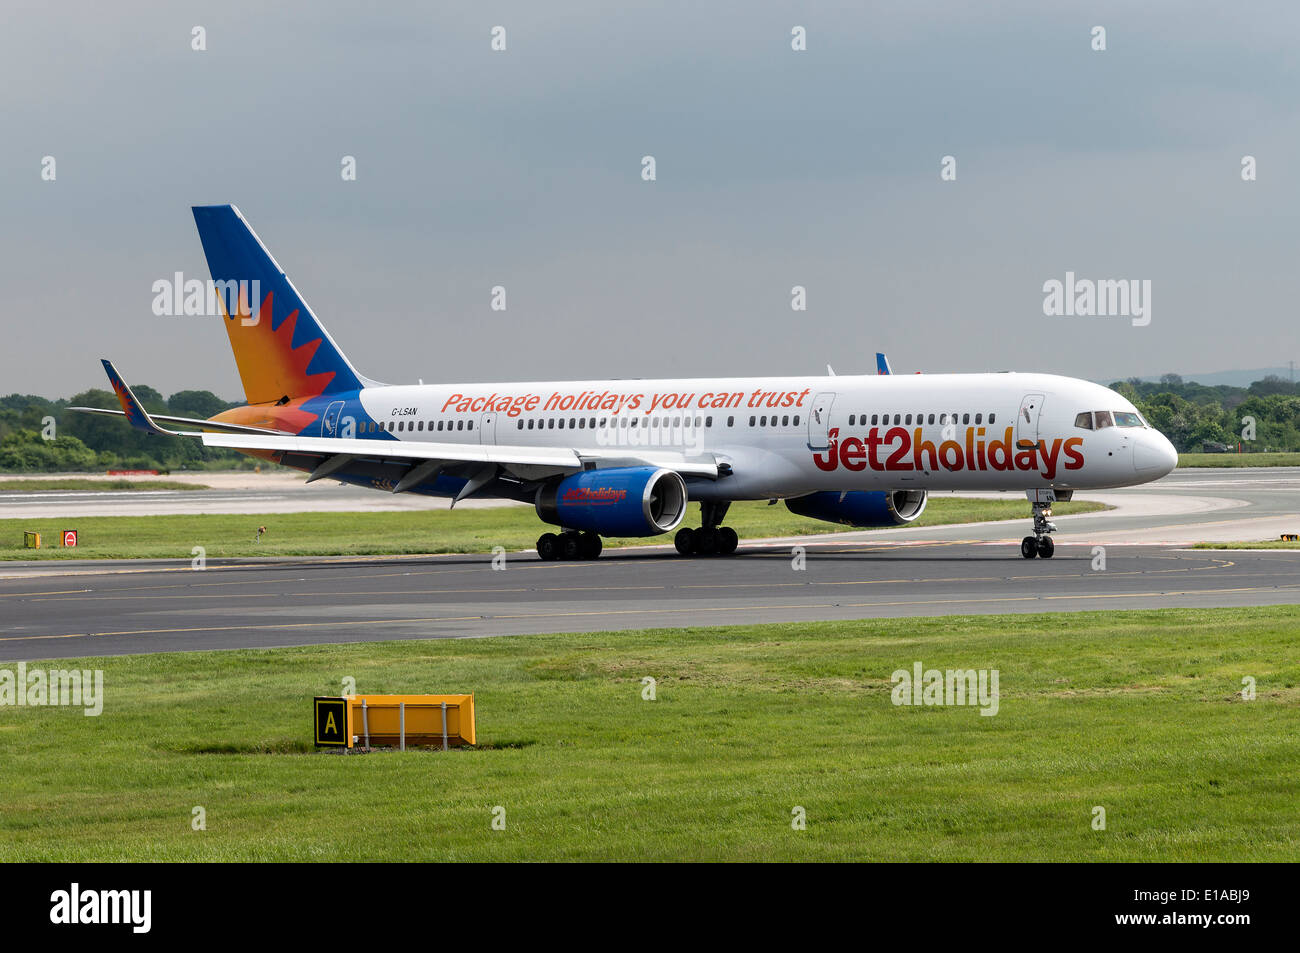 Jet2.Com Boeing 757-200 Series Airliner G-LSAN Taxiing at Manchester International Airport England United Kingdom UK Stock Photo